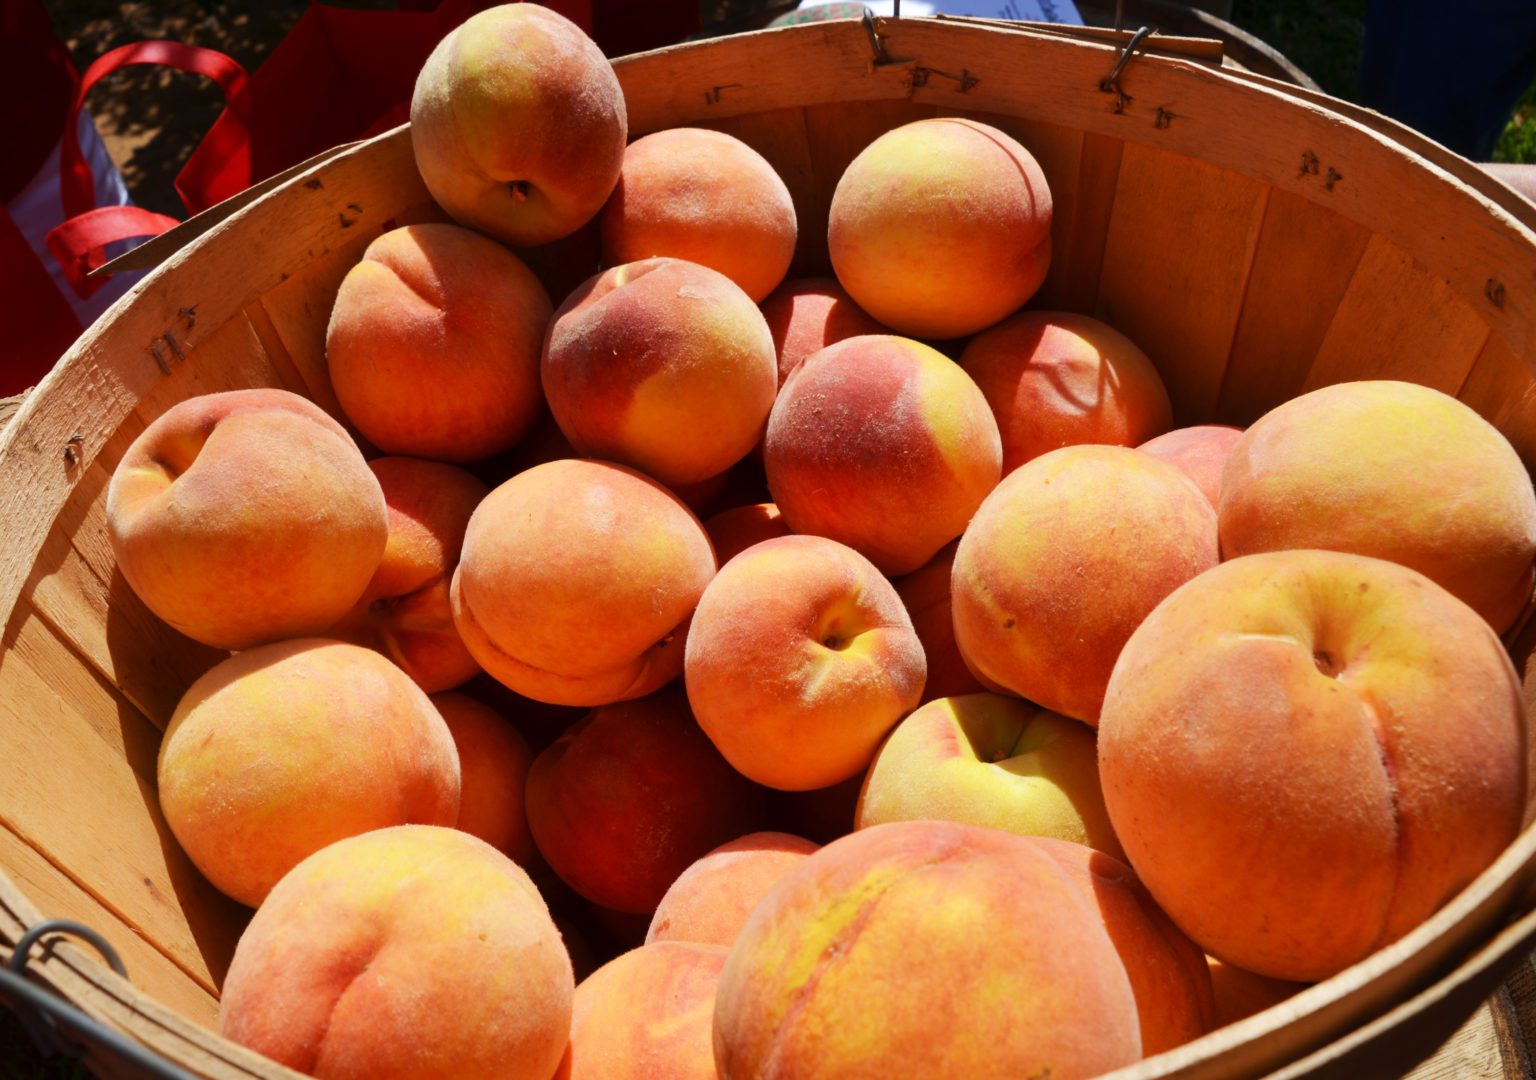 It's peaches on beaches in NJ for 'Eat a Peach Day' Fruit Growers News